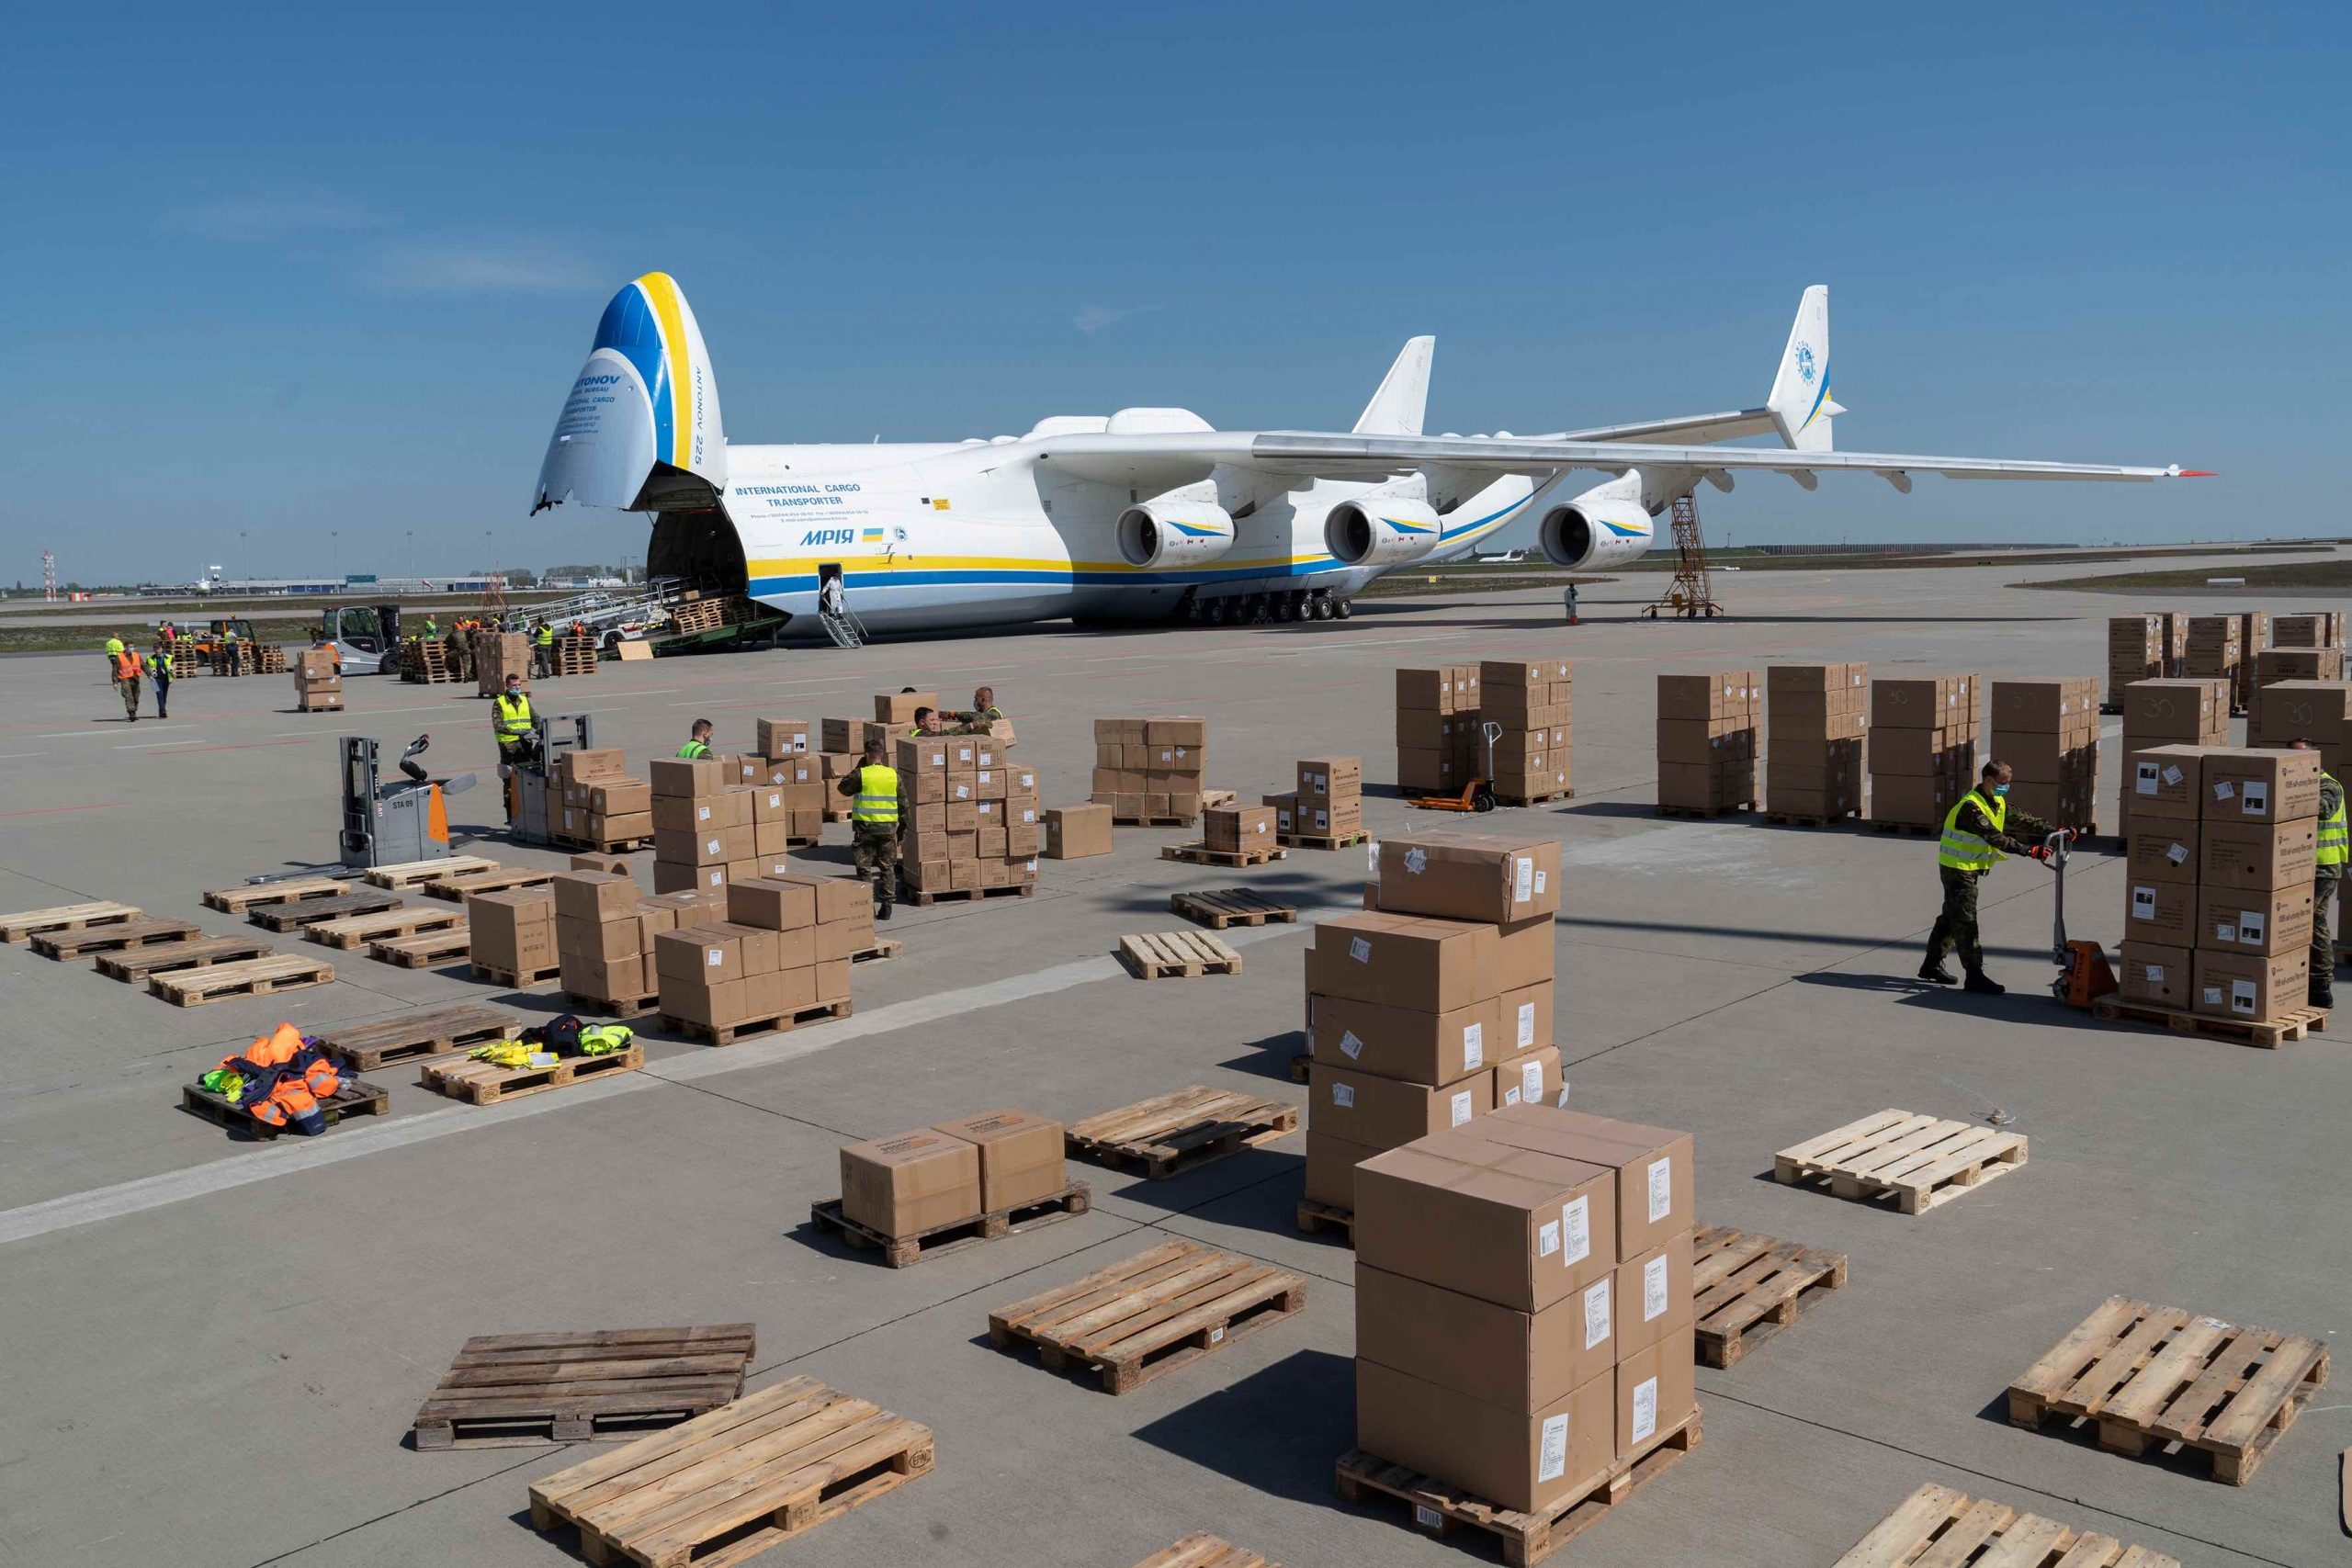 Giant An225 lands at Leipzig with medical supplies